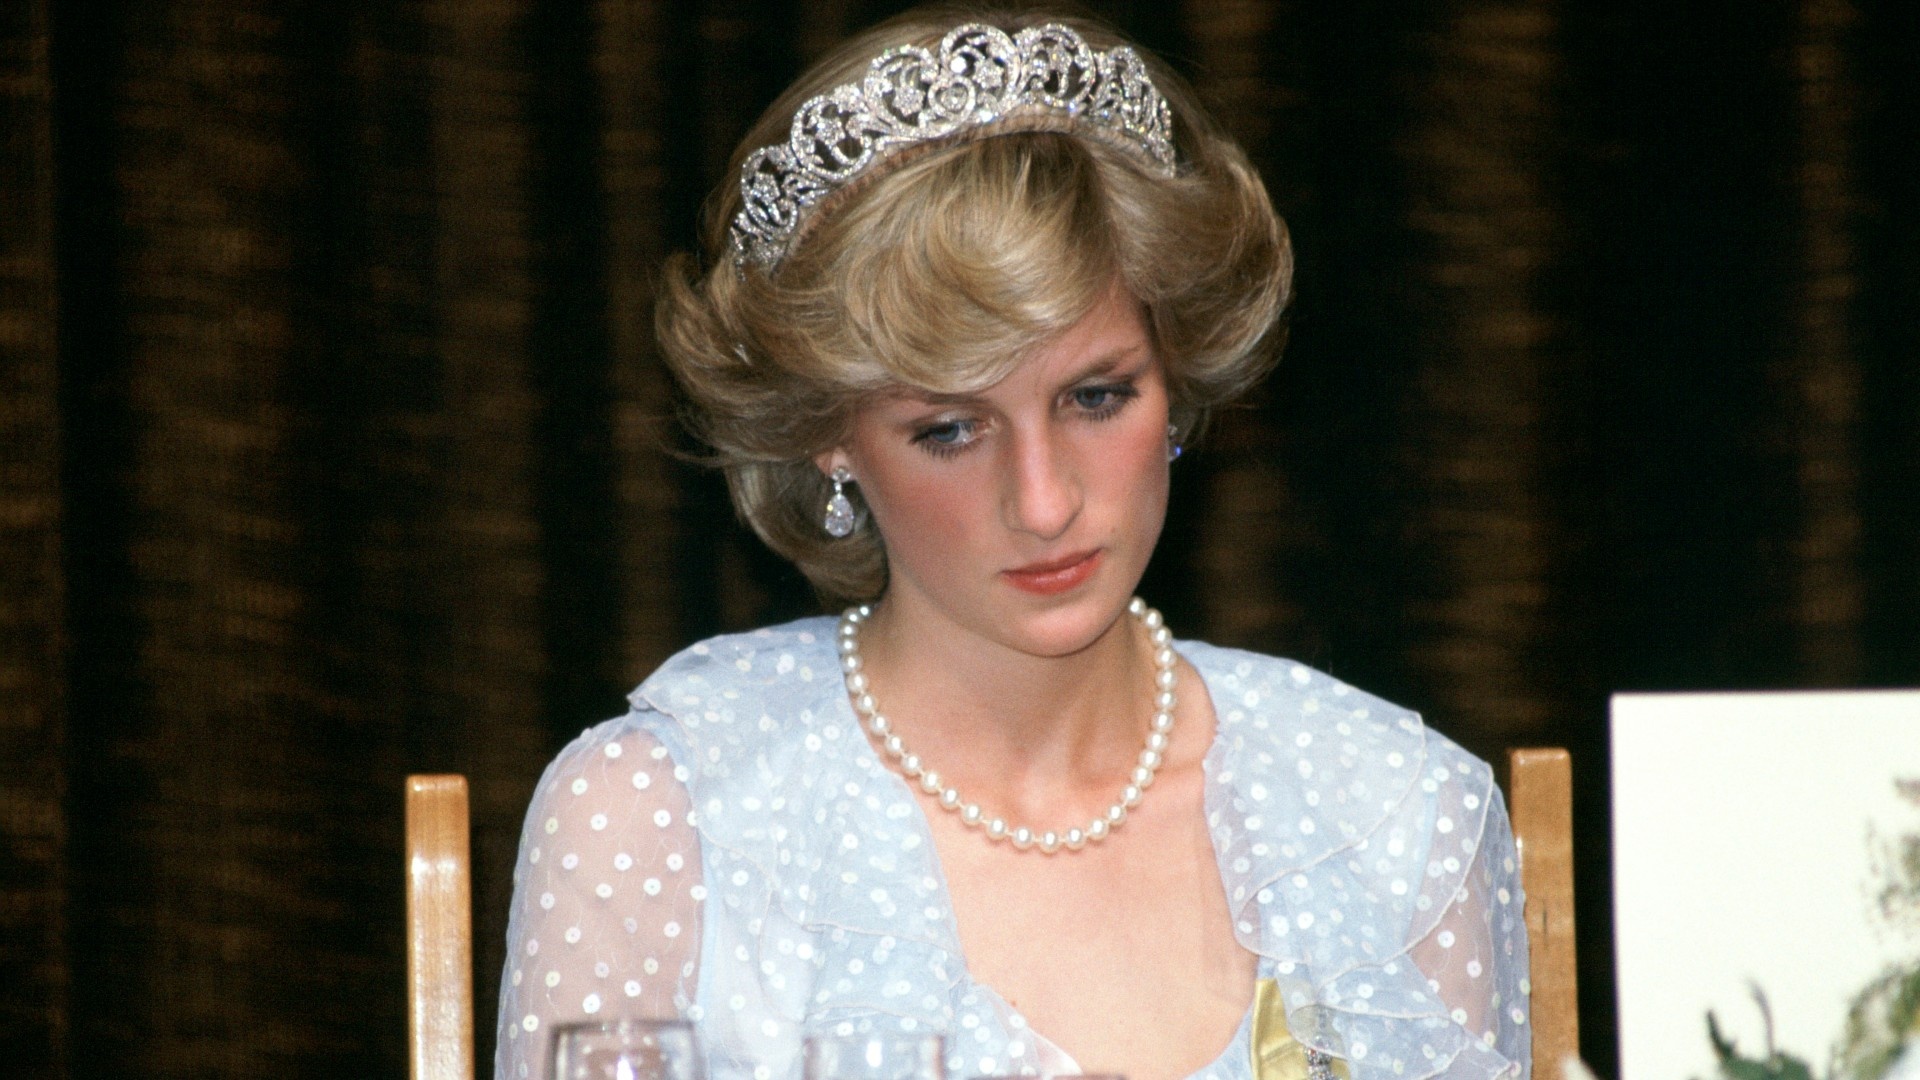 Princess Diana: Born into the British nobility and grew up close to the royal family on their Sandringham estate. 1920x1080 Full HD Wallpaper.